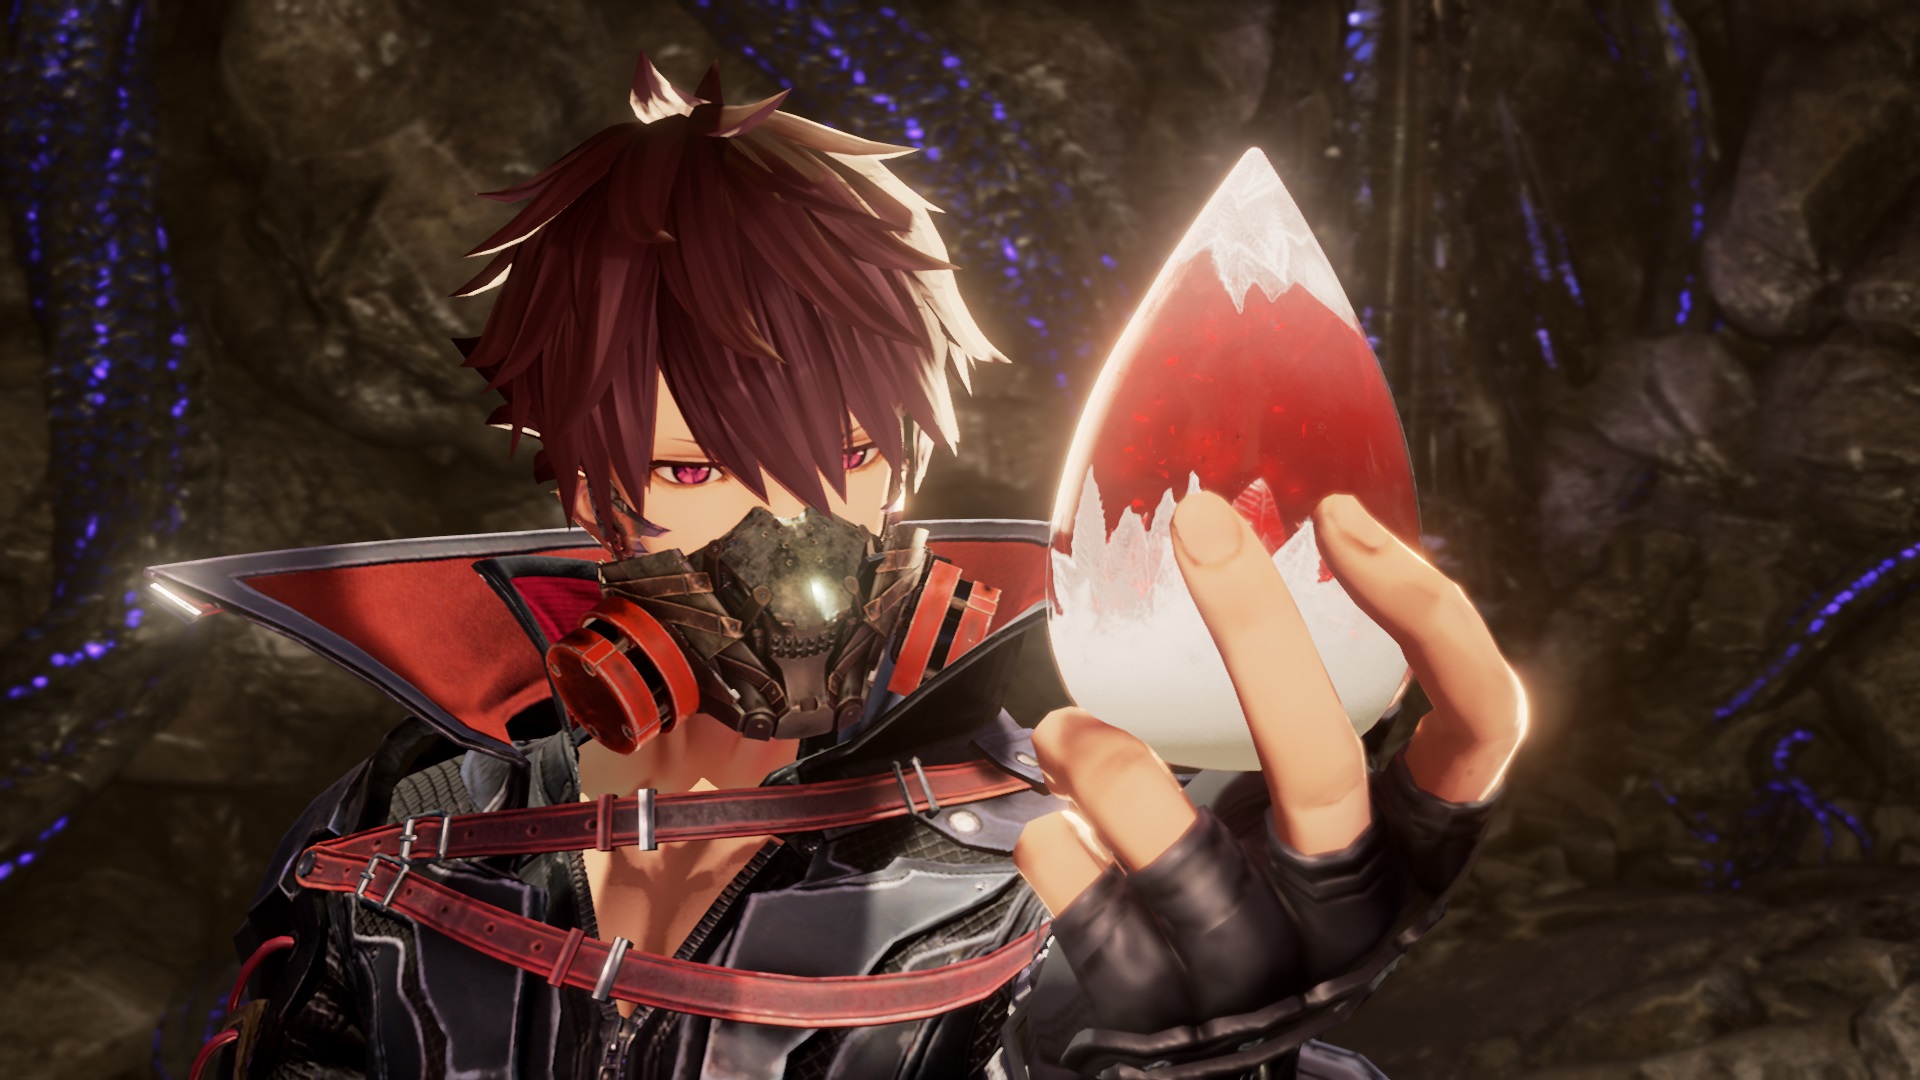 Code Vein Video Review: Is it Really an Anime Dark Souls